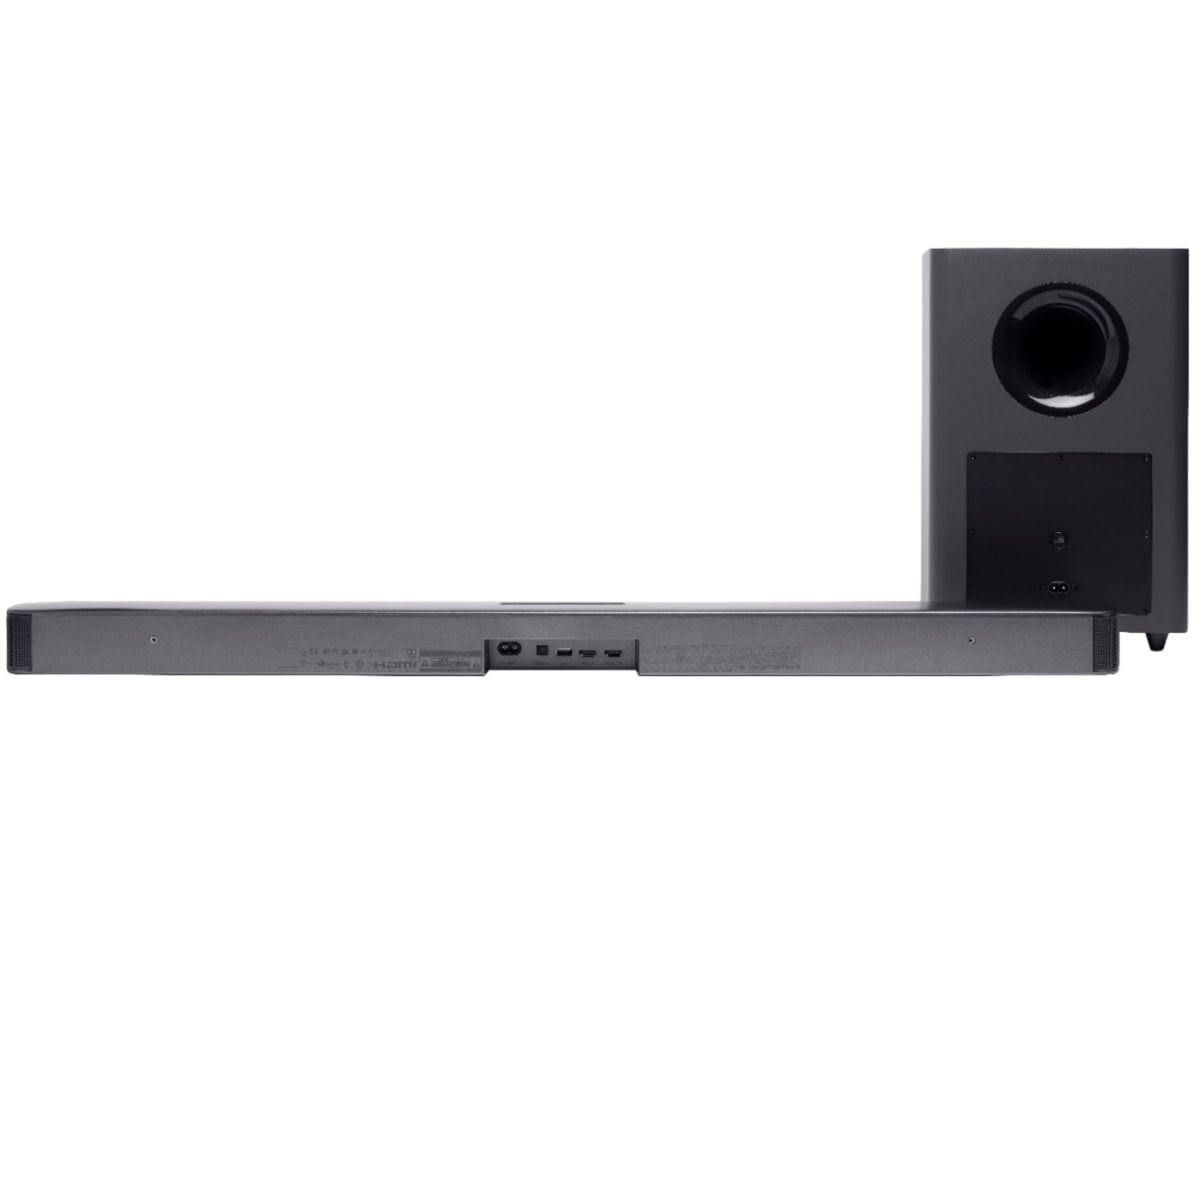 6395178Cv13D Scaled Jbl &Lt;H1&Gt;Jbl - 5.1-Channel Soundbar With Wireless Subwoofer - Black&Lt;/H1&Gt; Https://Www.youtube.com/Watch?V=386_Dt_1Ajy Get Better Audio Quality From Your Tv With This Jbl Bar 5.1 Surround Soundbar. Multibeam Technology Delivers Powerful Sound Without The Need For Extra Speakers, While Wi-Fi Connectivity Provides Access To Chromecast And Airplay 2 For Streaming Content. This Bluetooth-Enabled Jbl Bar 5.1 Surround Soundbar Features A Wireless Subwoofer That Adds Punchy Bass To Movie Soundtracks And Action-Packed Scenes. Jbl Jbl - 5.1-Channel Soundbar With Wireless Subwoofer - Black